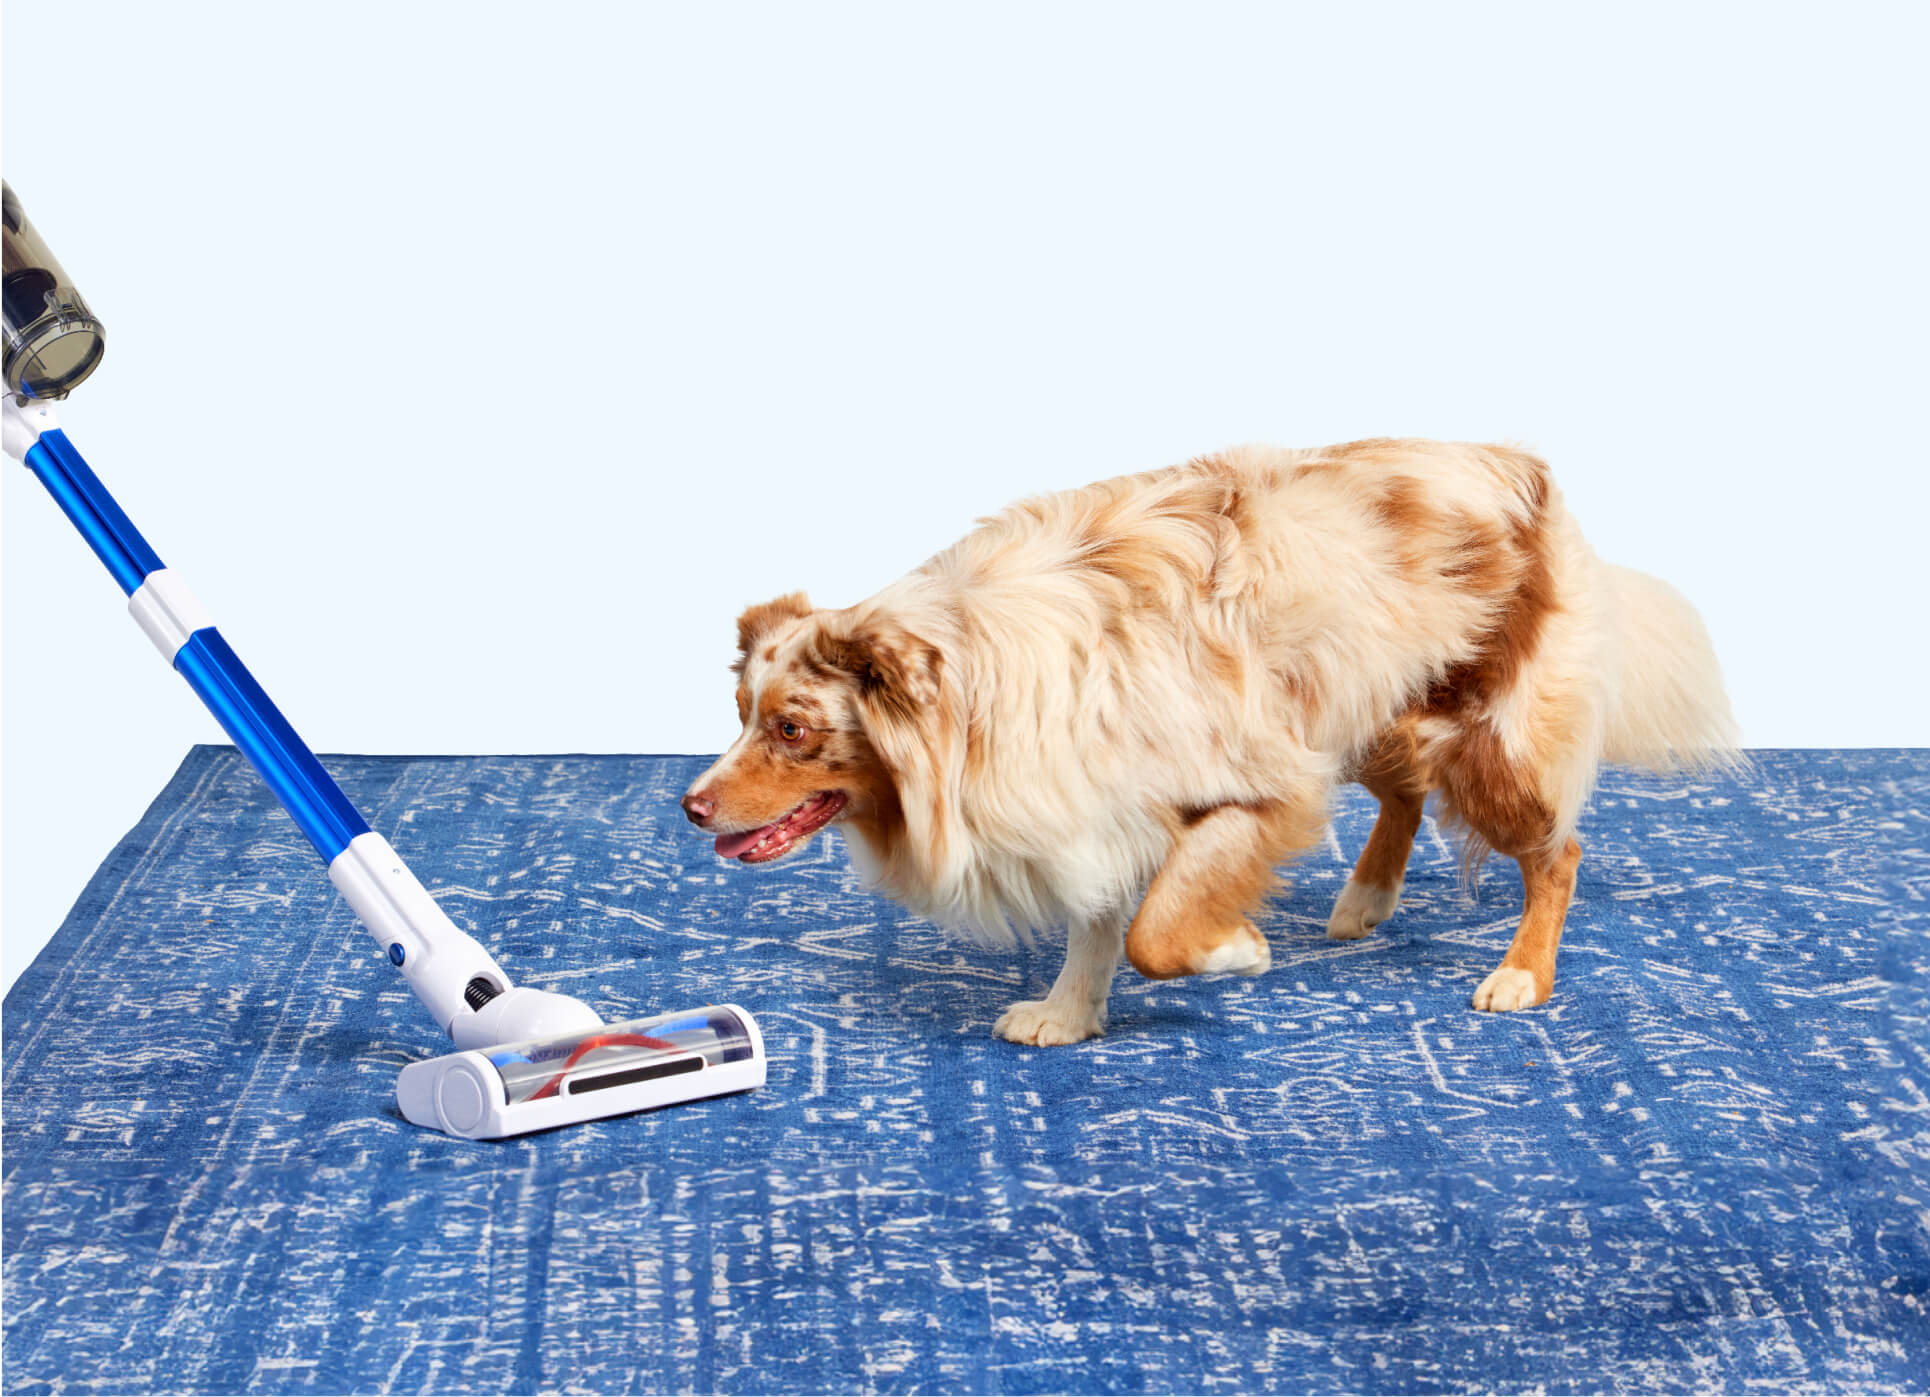 Photo of a dog chasing a vacuum on a rug.